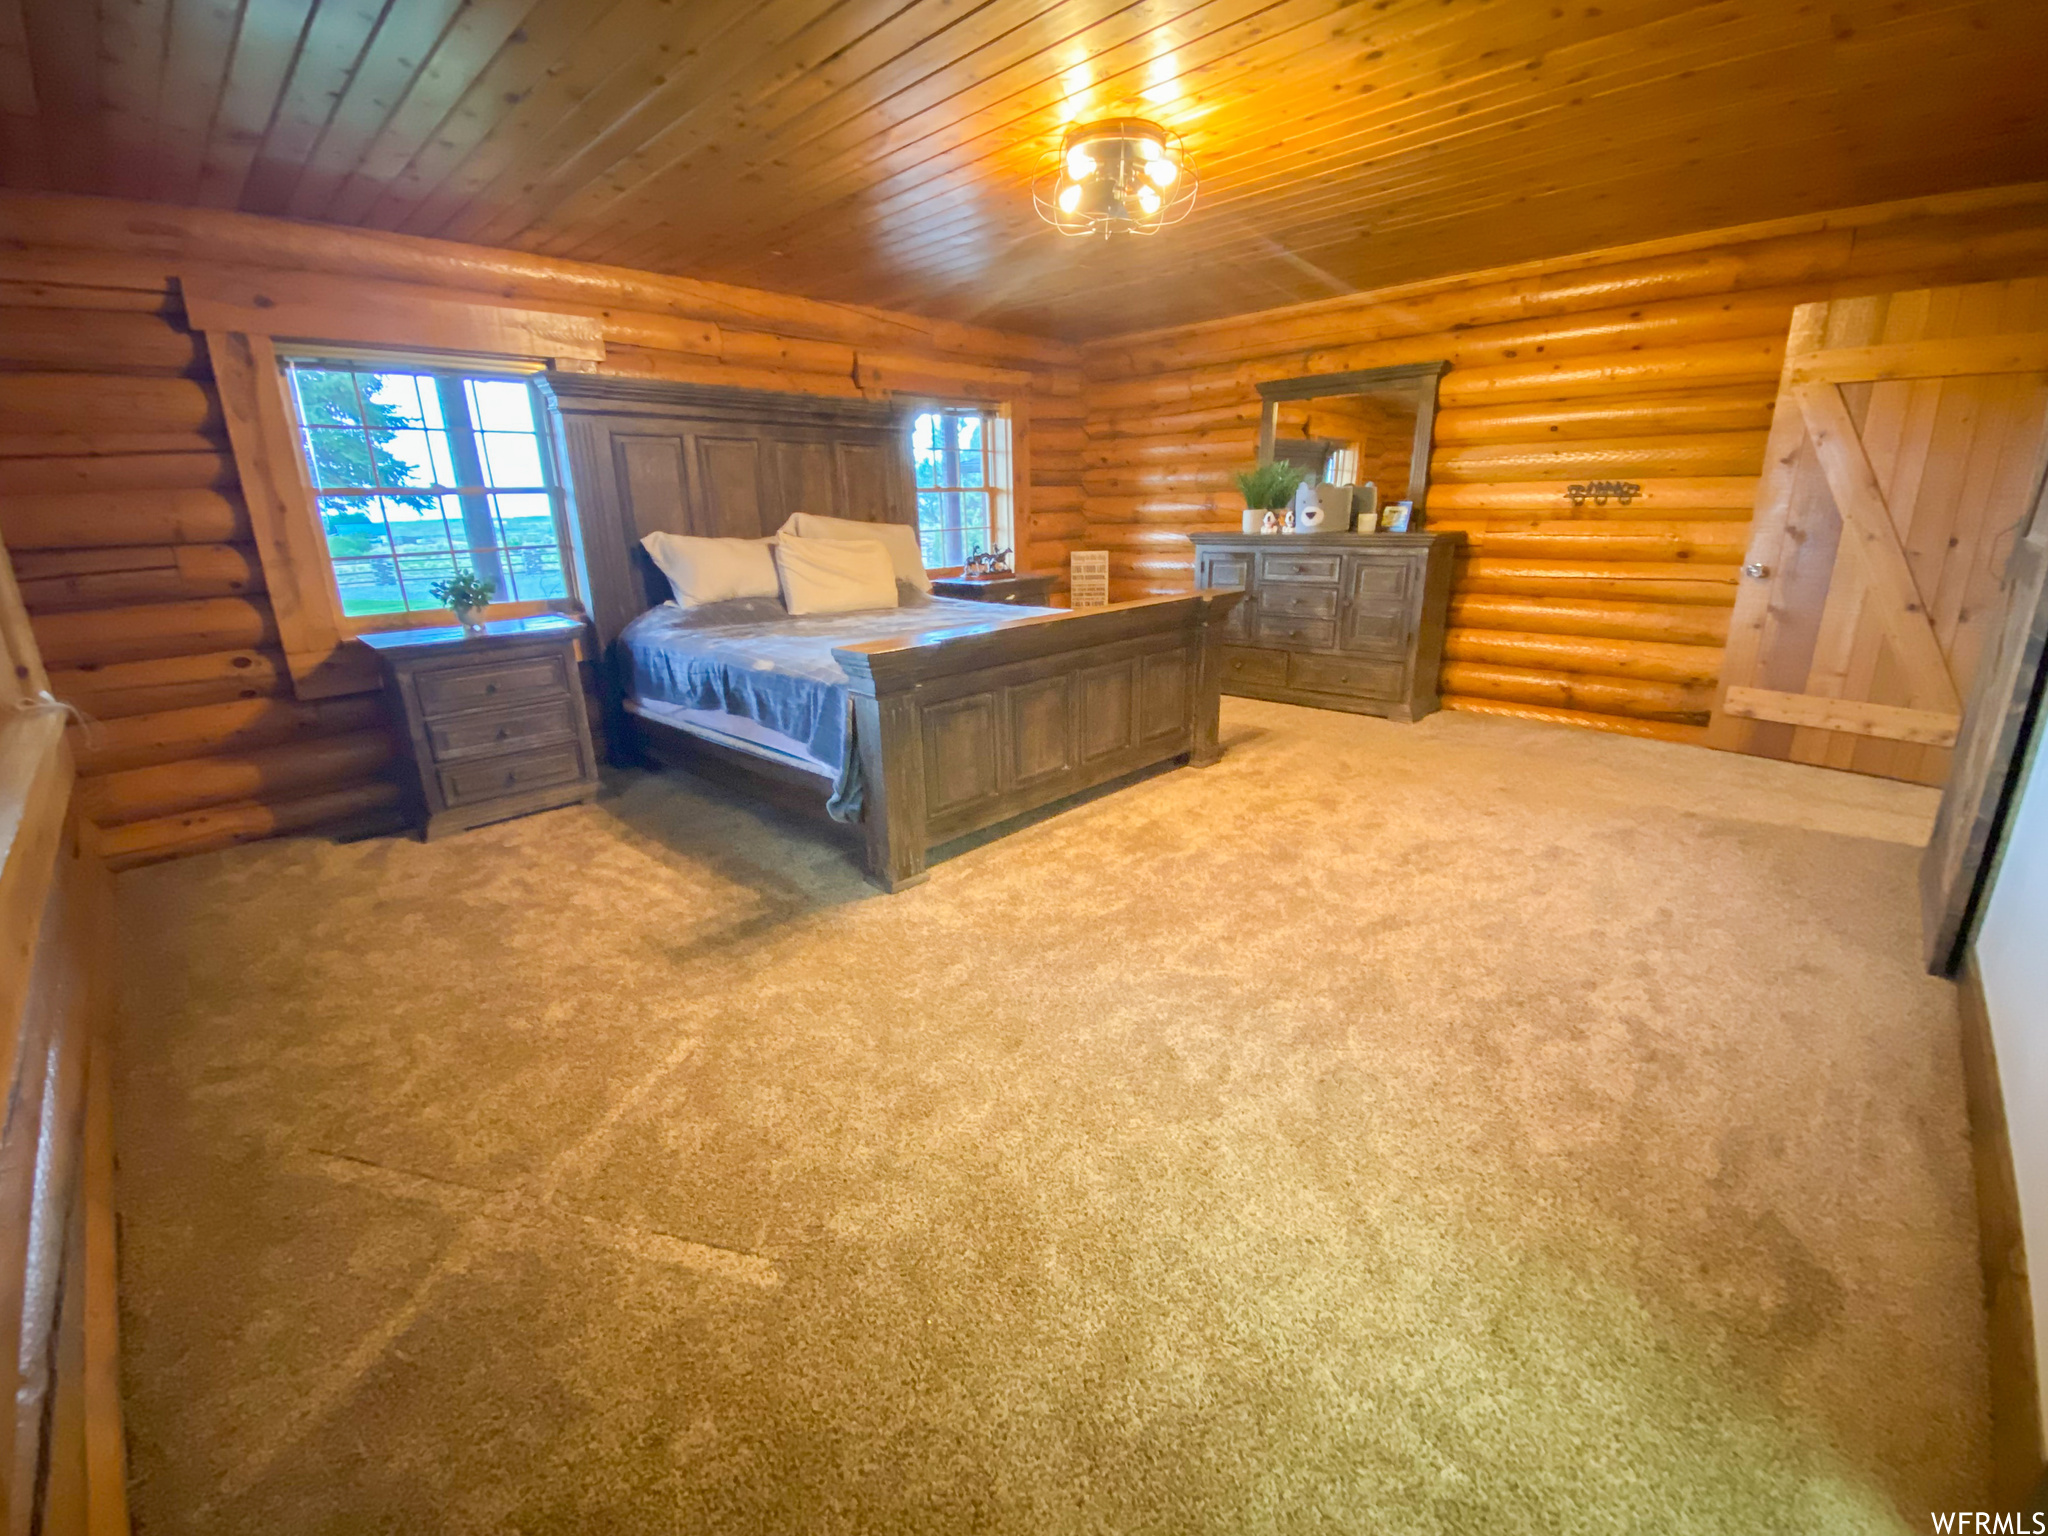 Bedroom featuring carpet, multiple windows, wood ceiling, and rustic walls